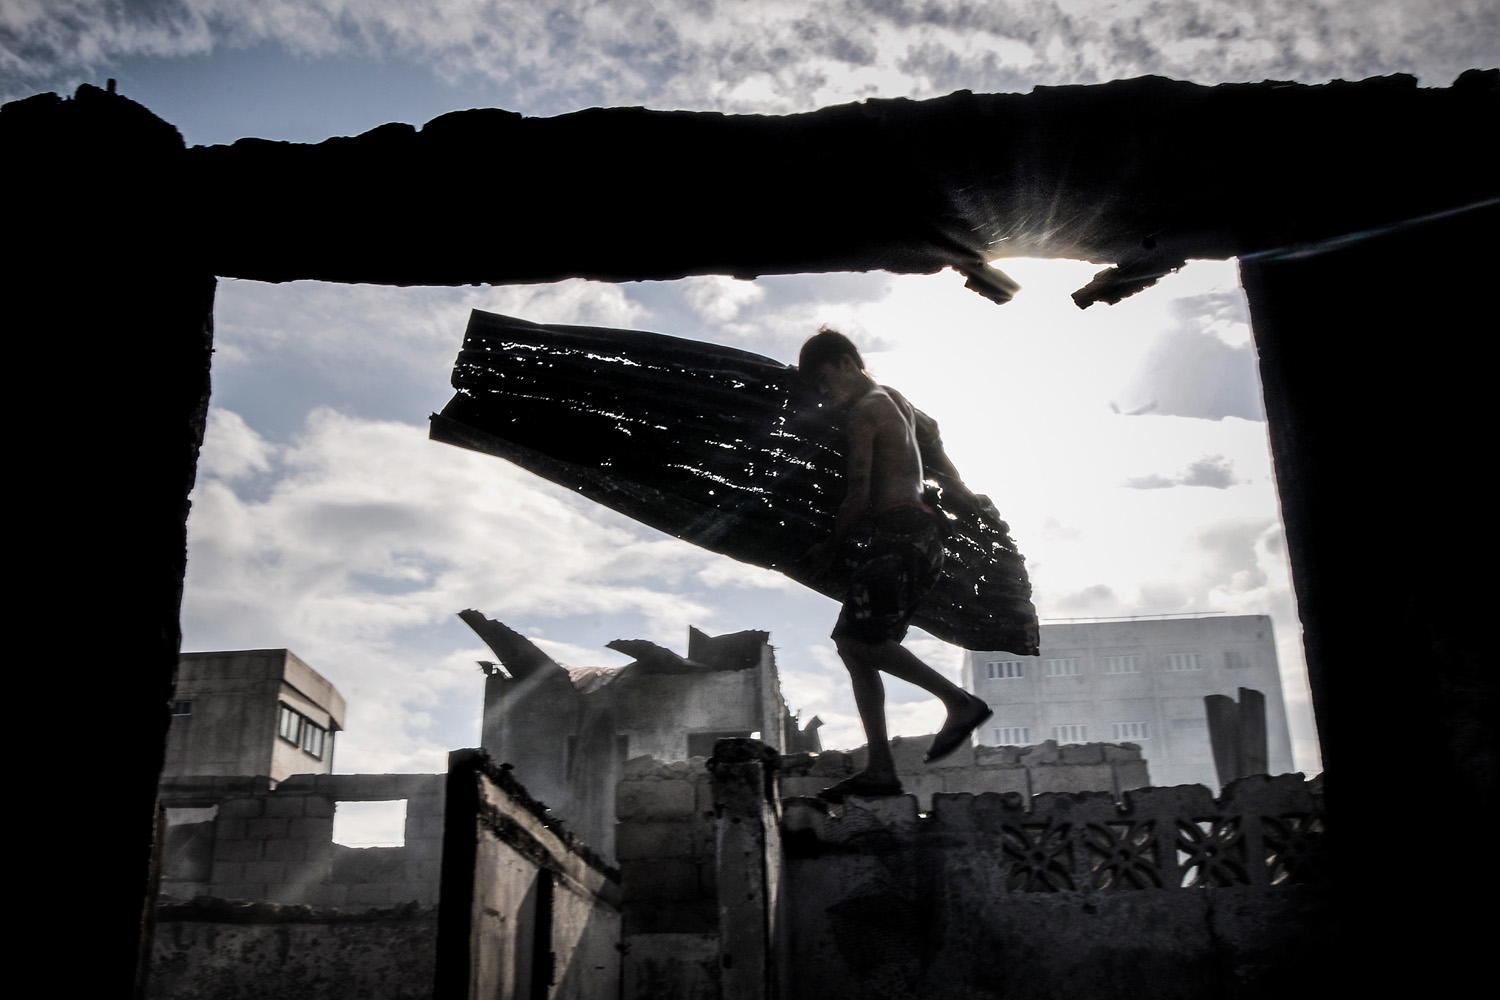 Mar. 23, 2014. A resident collects scrap metal from the rubble of burnt shanties after a fire gutted a residential area in Caloocan city, north of Manila, Philippines.